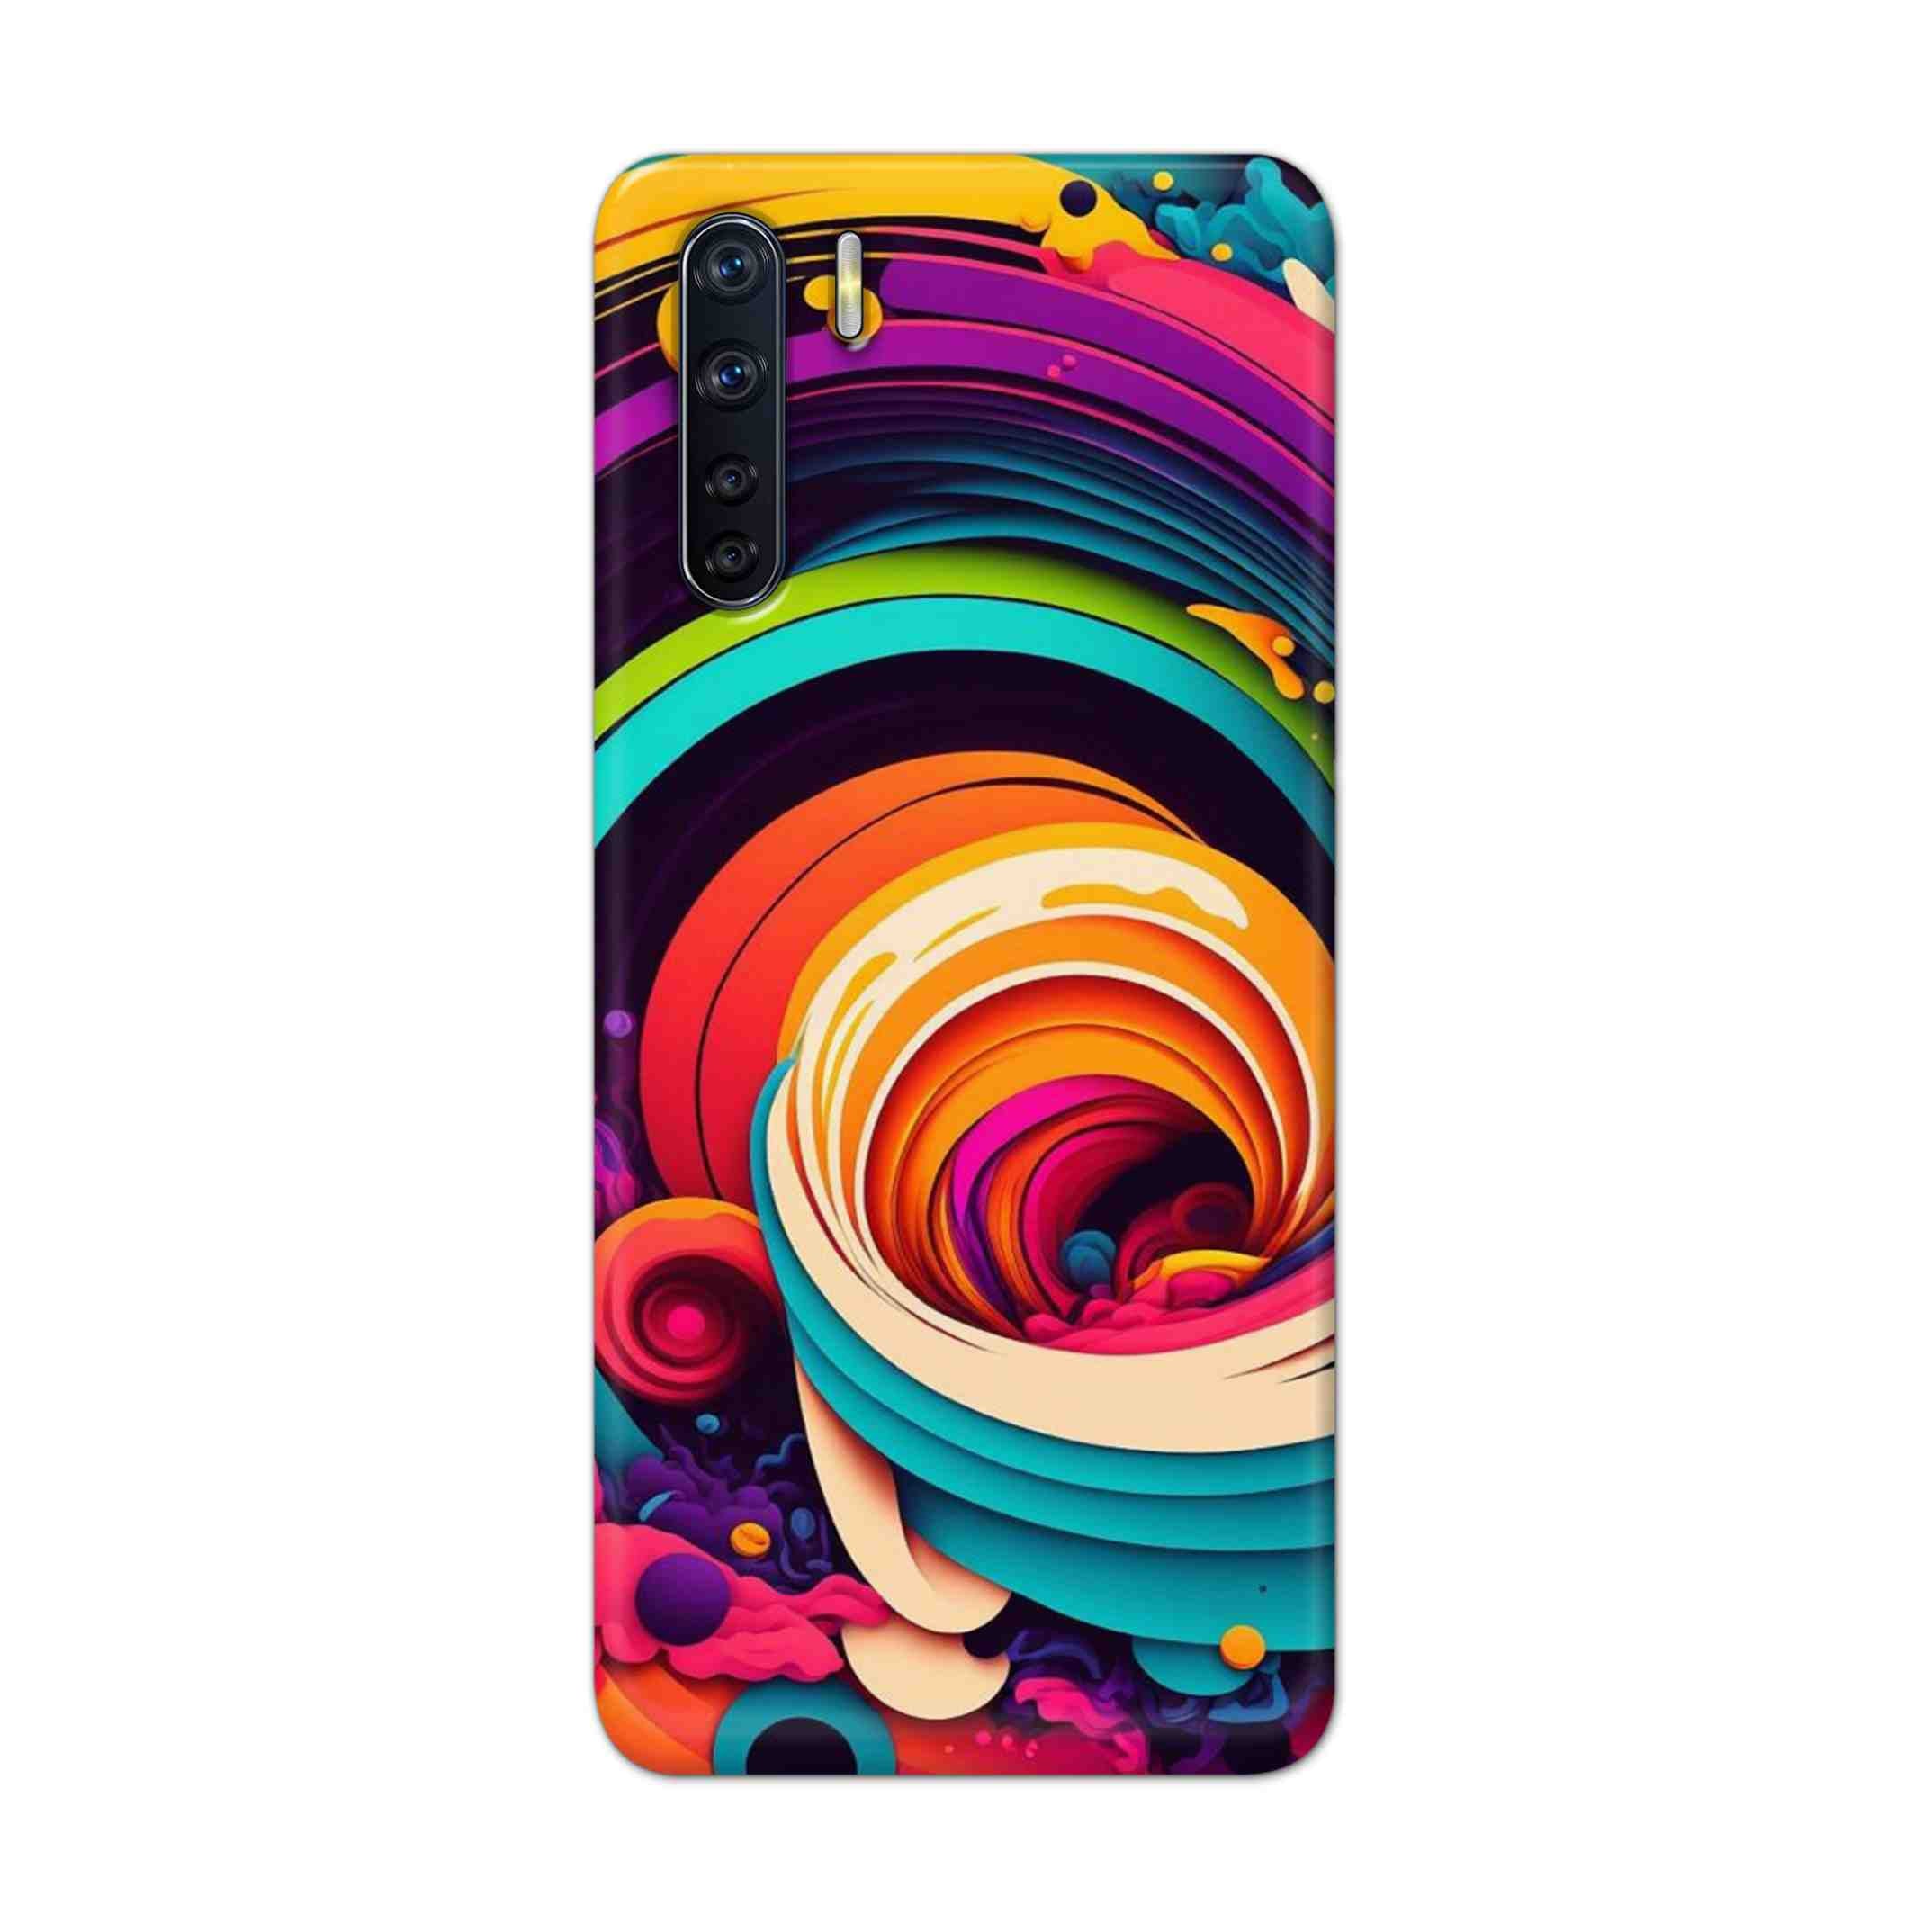 Buy Colour Circle Hard Back Mobile Phone Case Cover For OPPO F15 Online